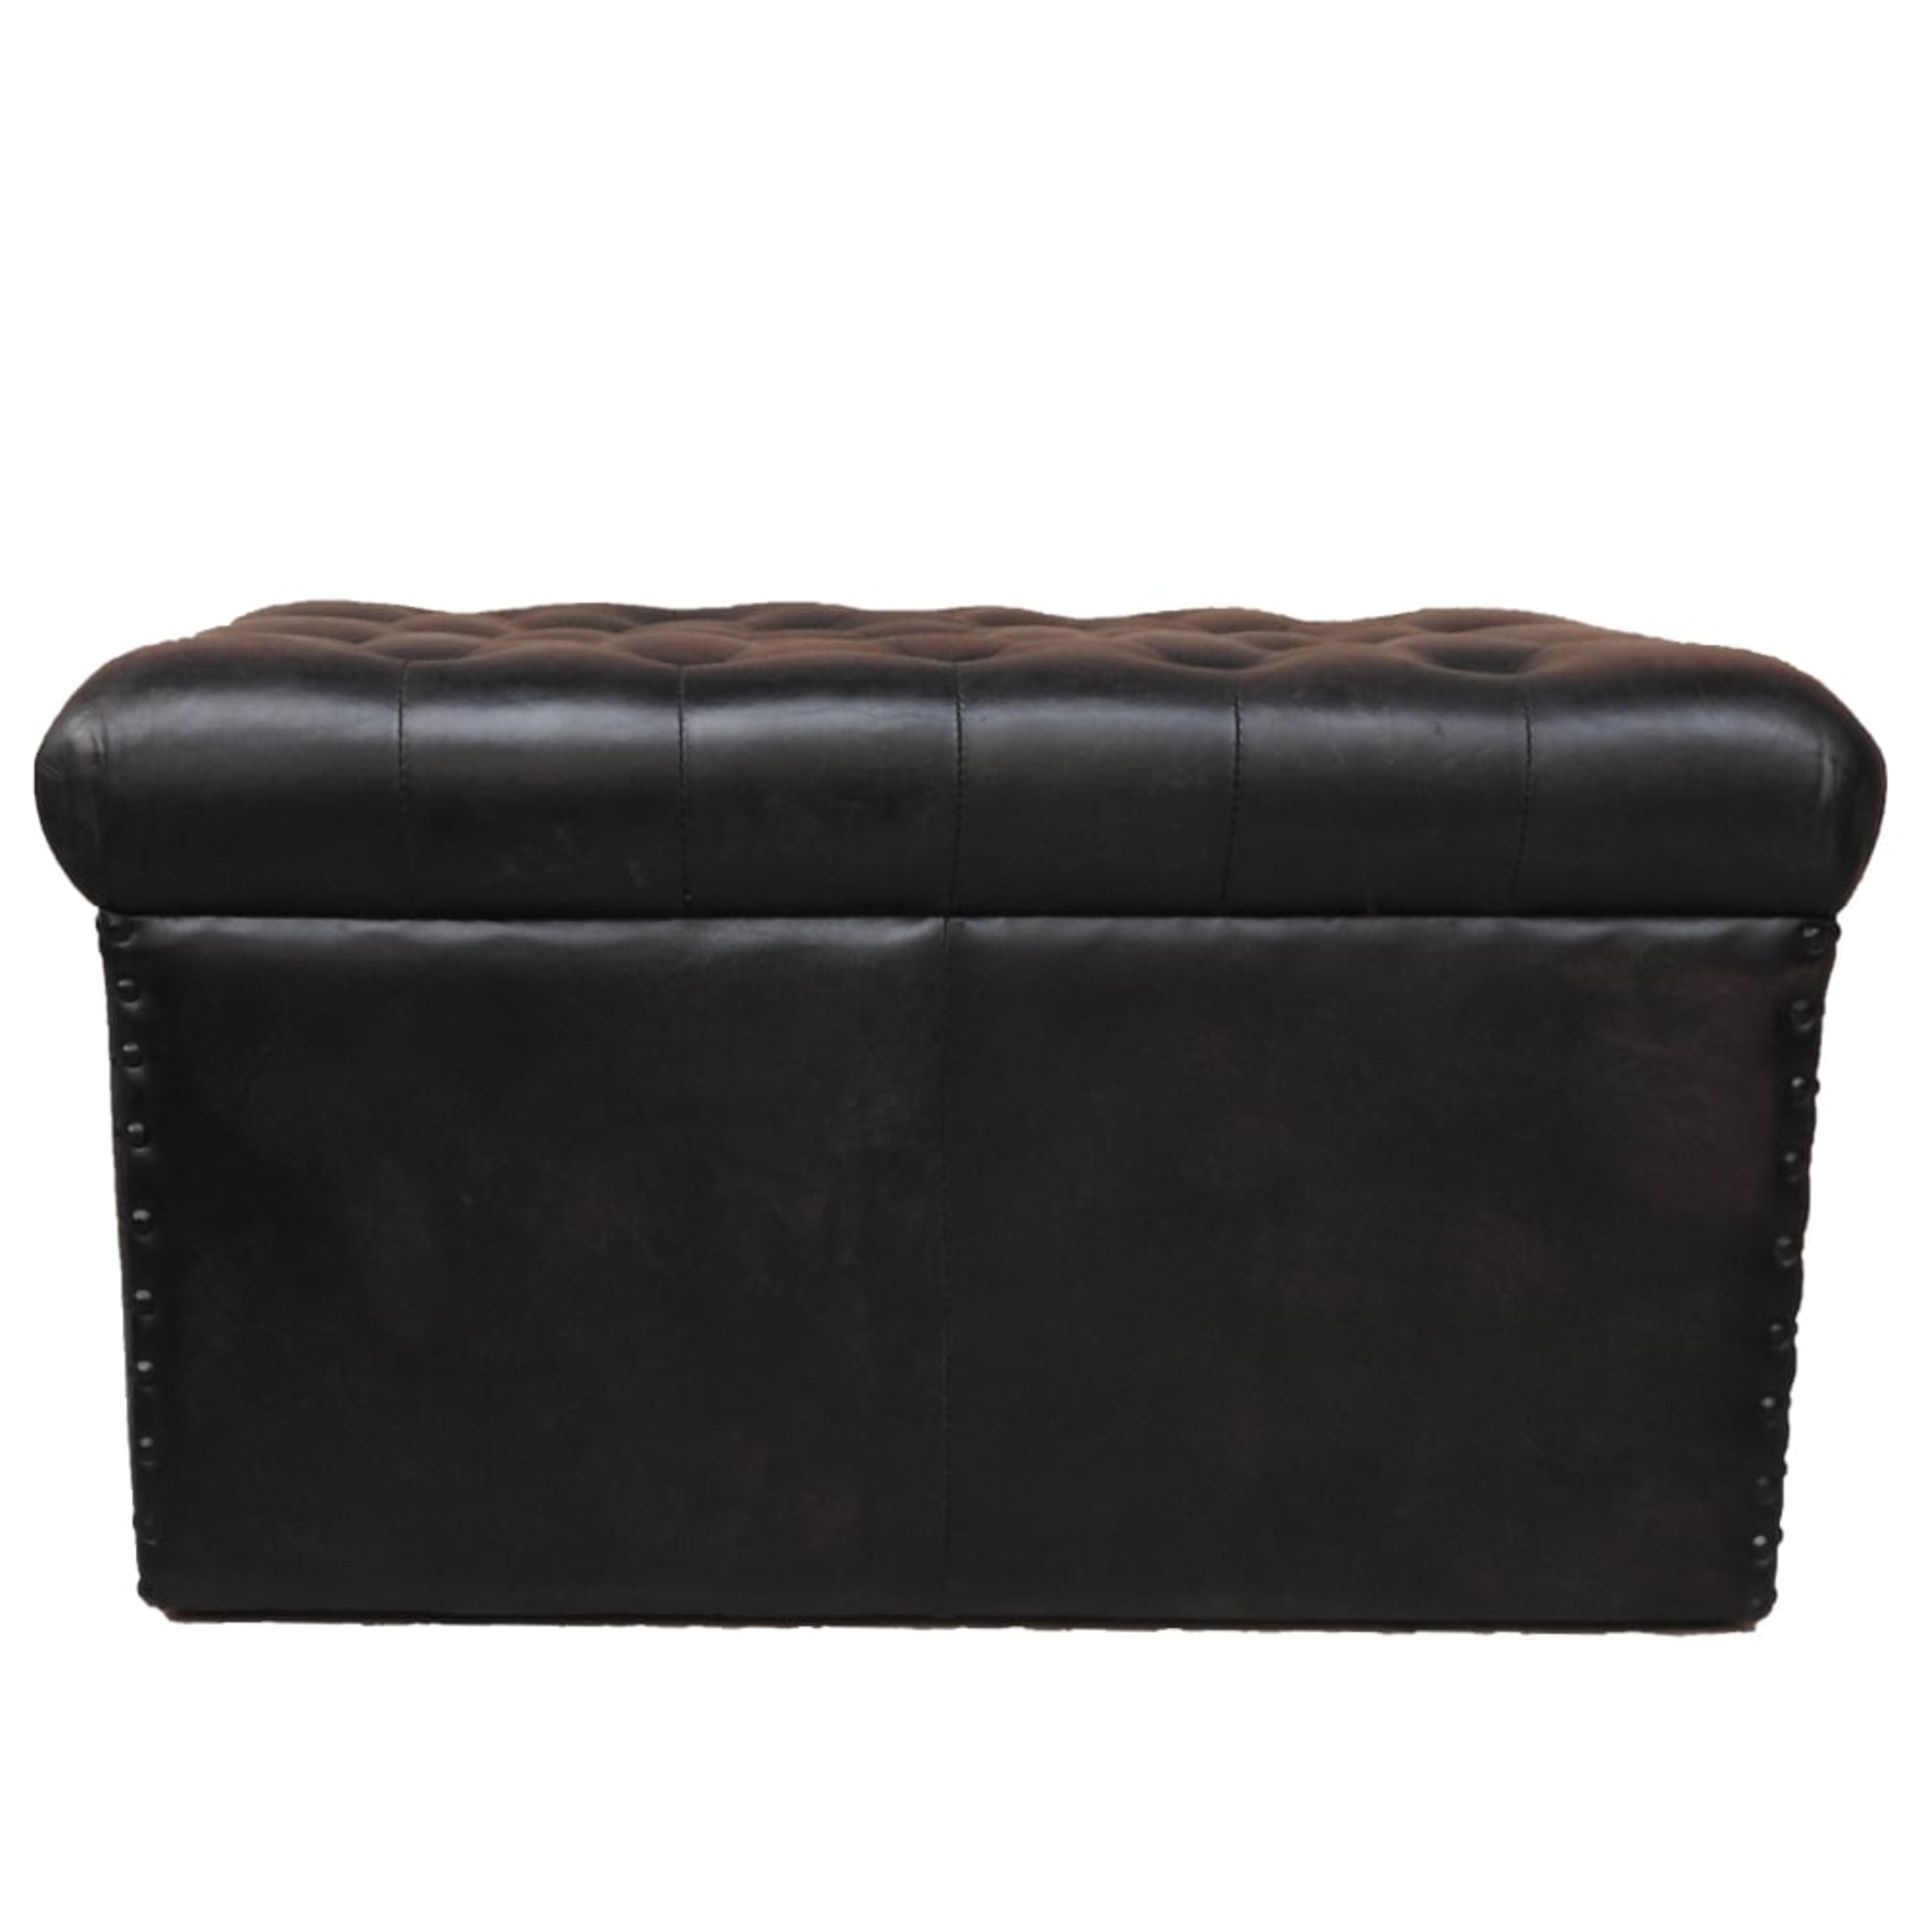 Leather Chesterfield Box Stool Handmade Chesterfield leather in a vintage finish. - Image 2 of 2